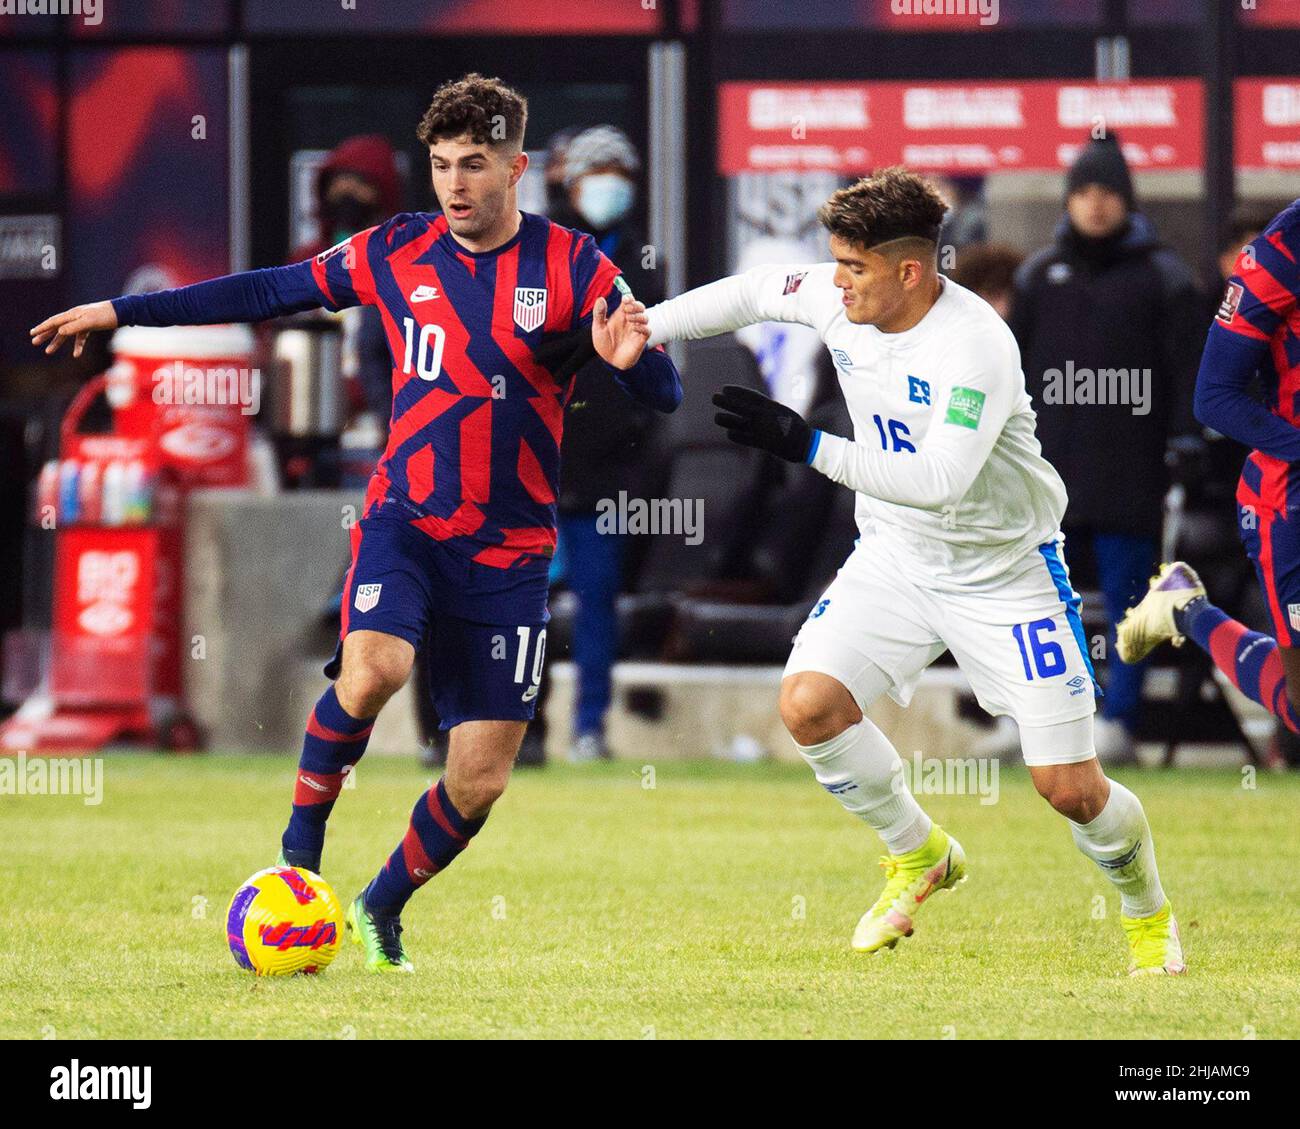 Columbus, Ohio, USA. 27th Jan, 2022. United States forward Christian Pulisic (10) fights for the ball against El Salvador midfielder Alex Roldan (16) in their match in Columbus, Ohio, USA. Credit: Brent Clark/Alamy Live News Stock Photo